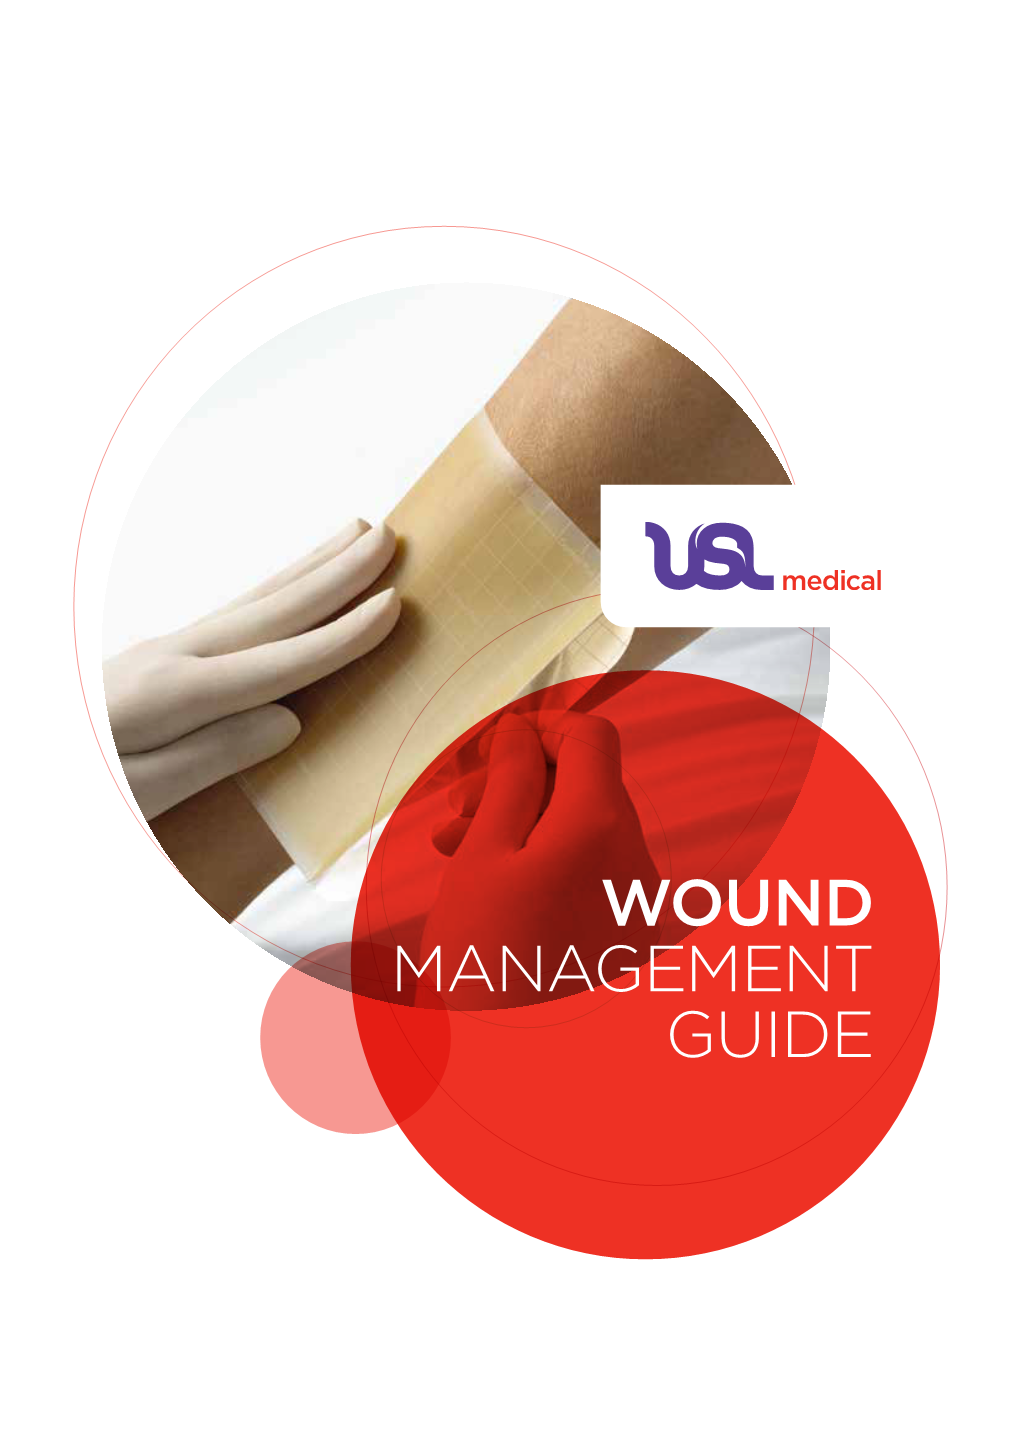 WOUND Management Guide SONICAID FETAL MONITORS